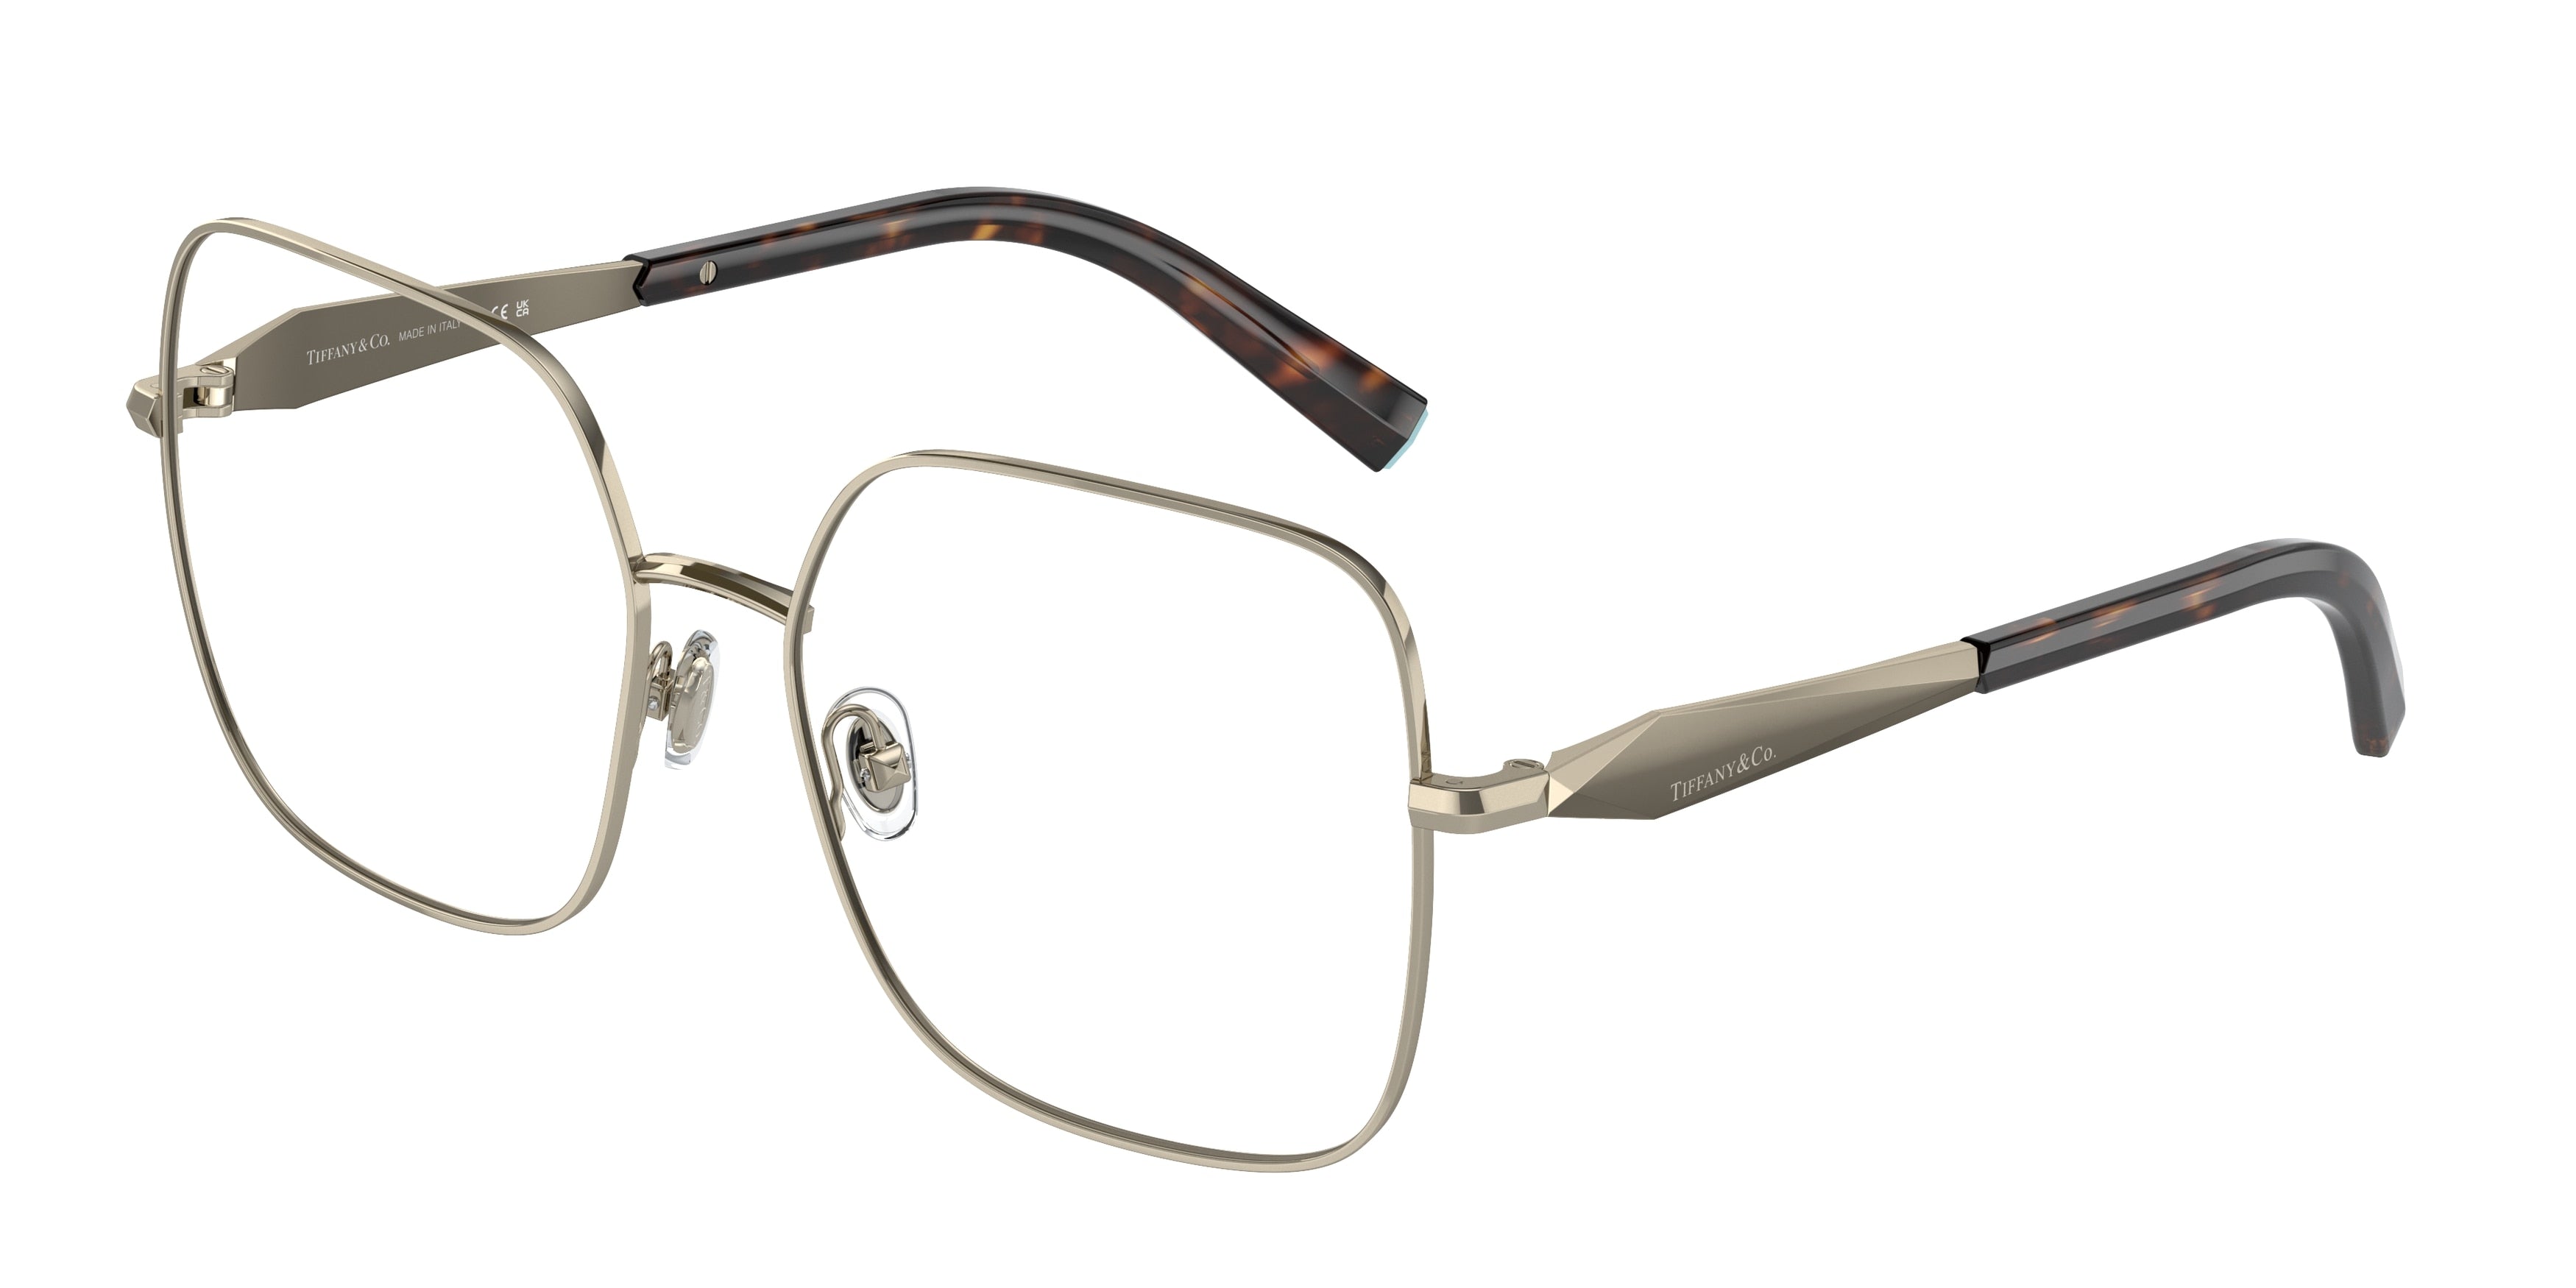 Tiffany TF1151 Square Eyeglasses  6021-Pale Gold 56-140-16 - Color Map Gold